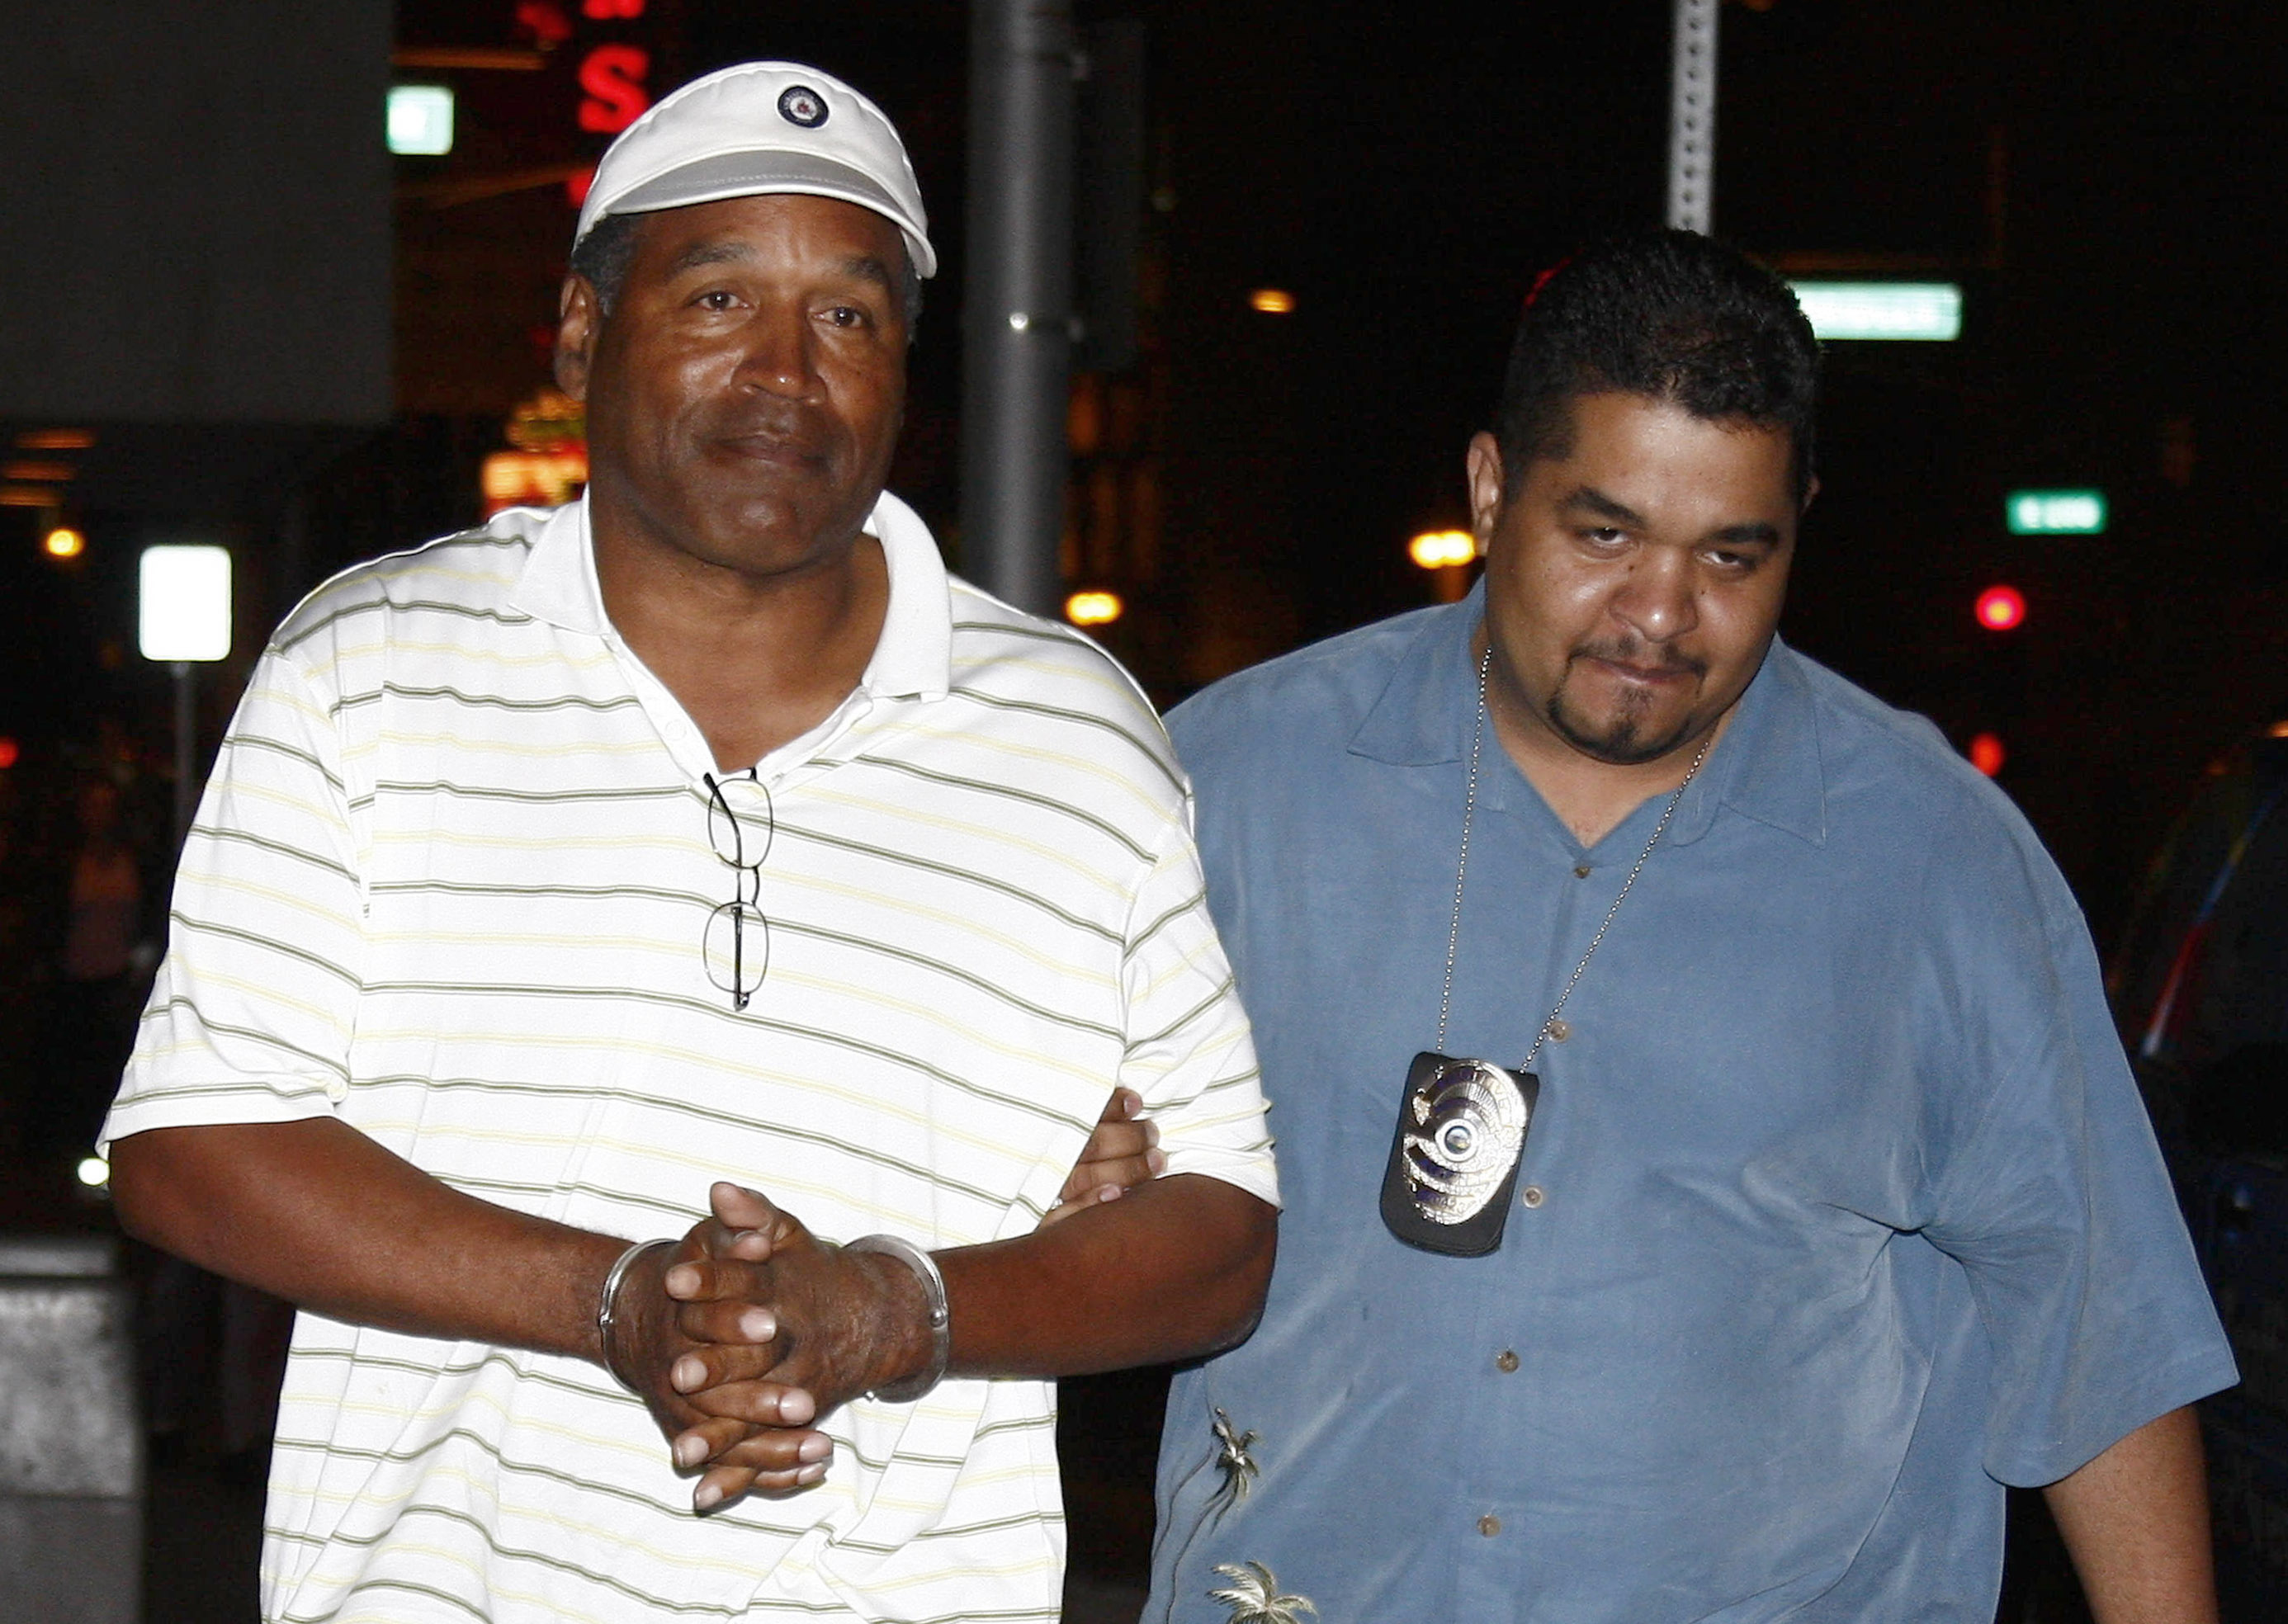 O.J. Simpson is brought into the Las Vegas Clark County Detention Center in Las Vegas, Nevada